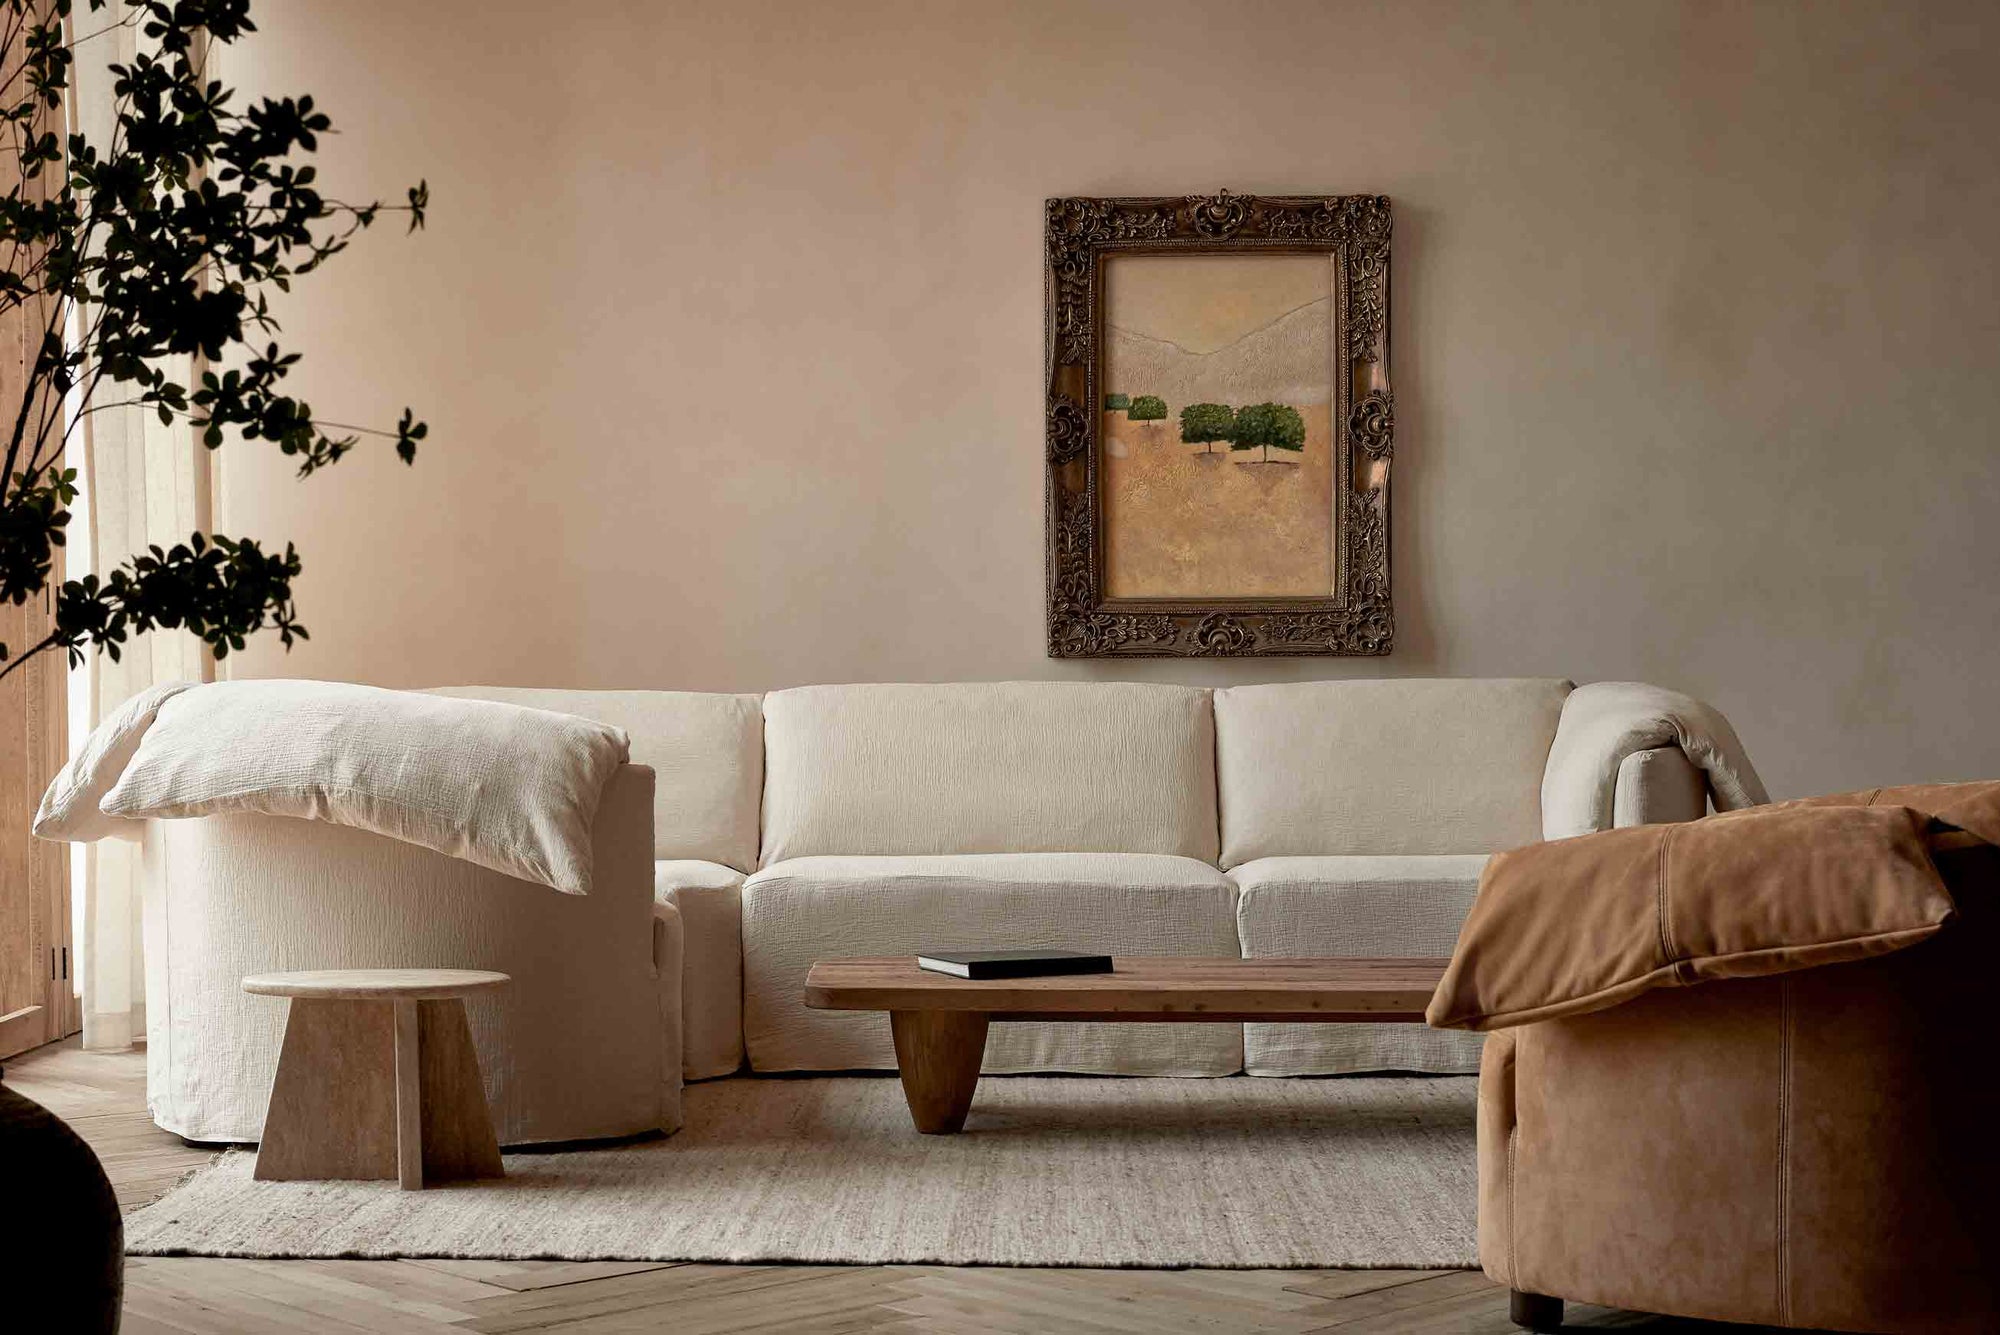 Loula L-Shape Sectional in Corn Silk, a light beige Washed Cotton Linen, placed in a living room with a Theo Coffee Table, decorative side table, and Loula Leather Chair